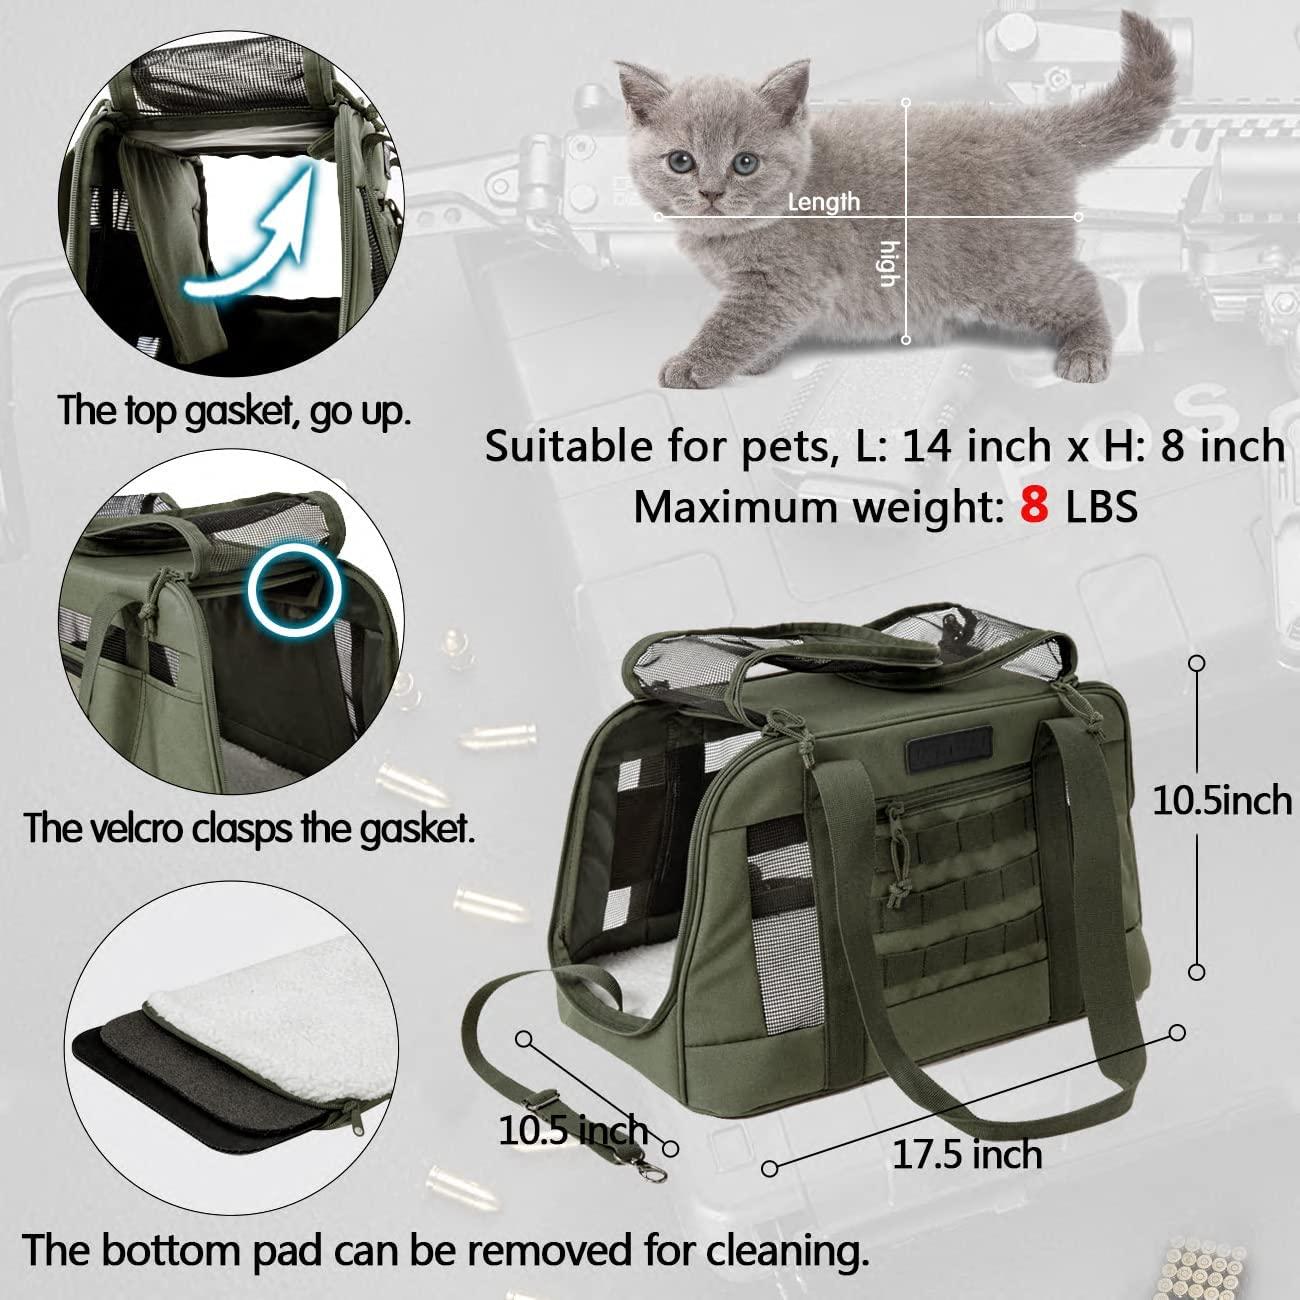 Pet Carriers Airline Approved Dog Carrier Soft Sided Collapsible Pet Travel  Carrier for Small Medium Puppy and Cats